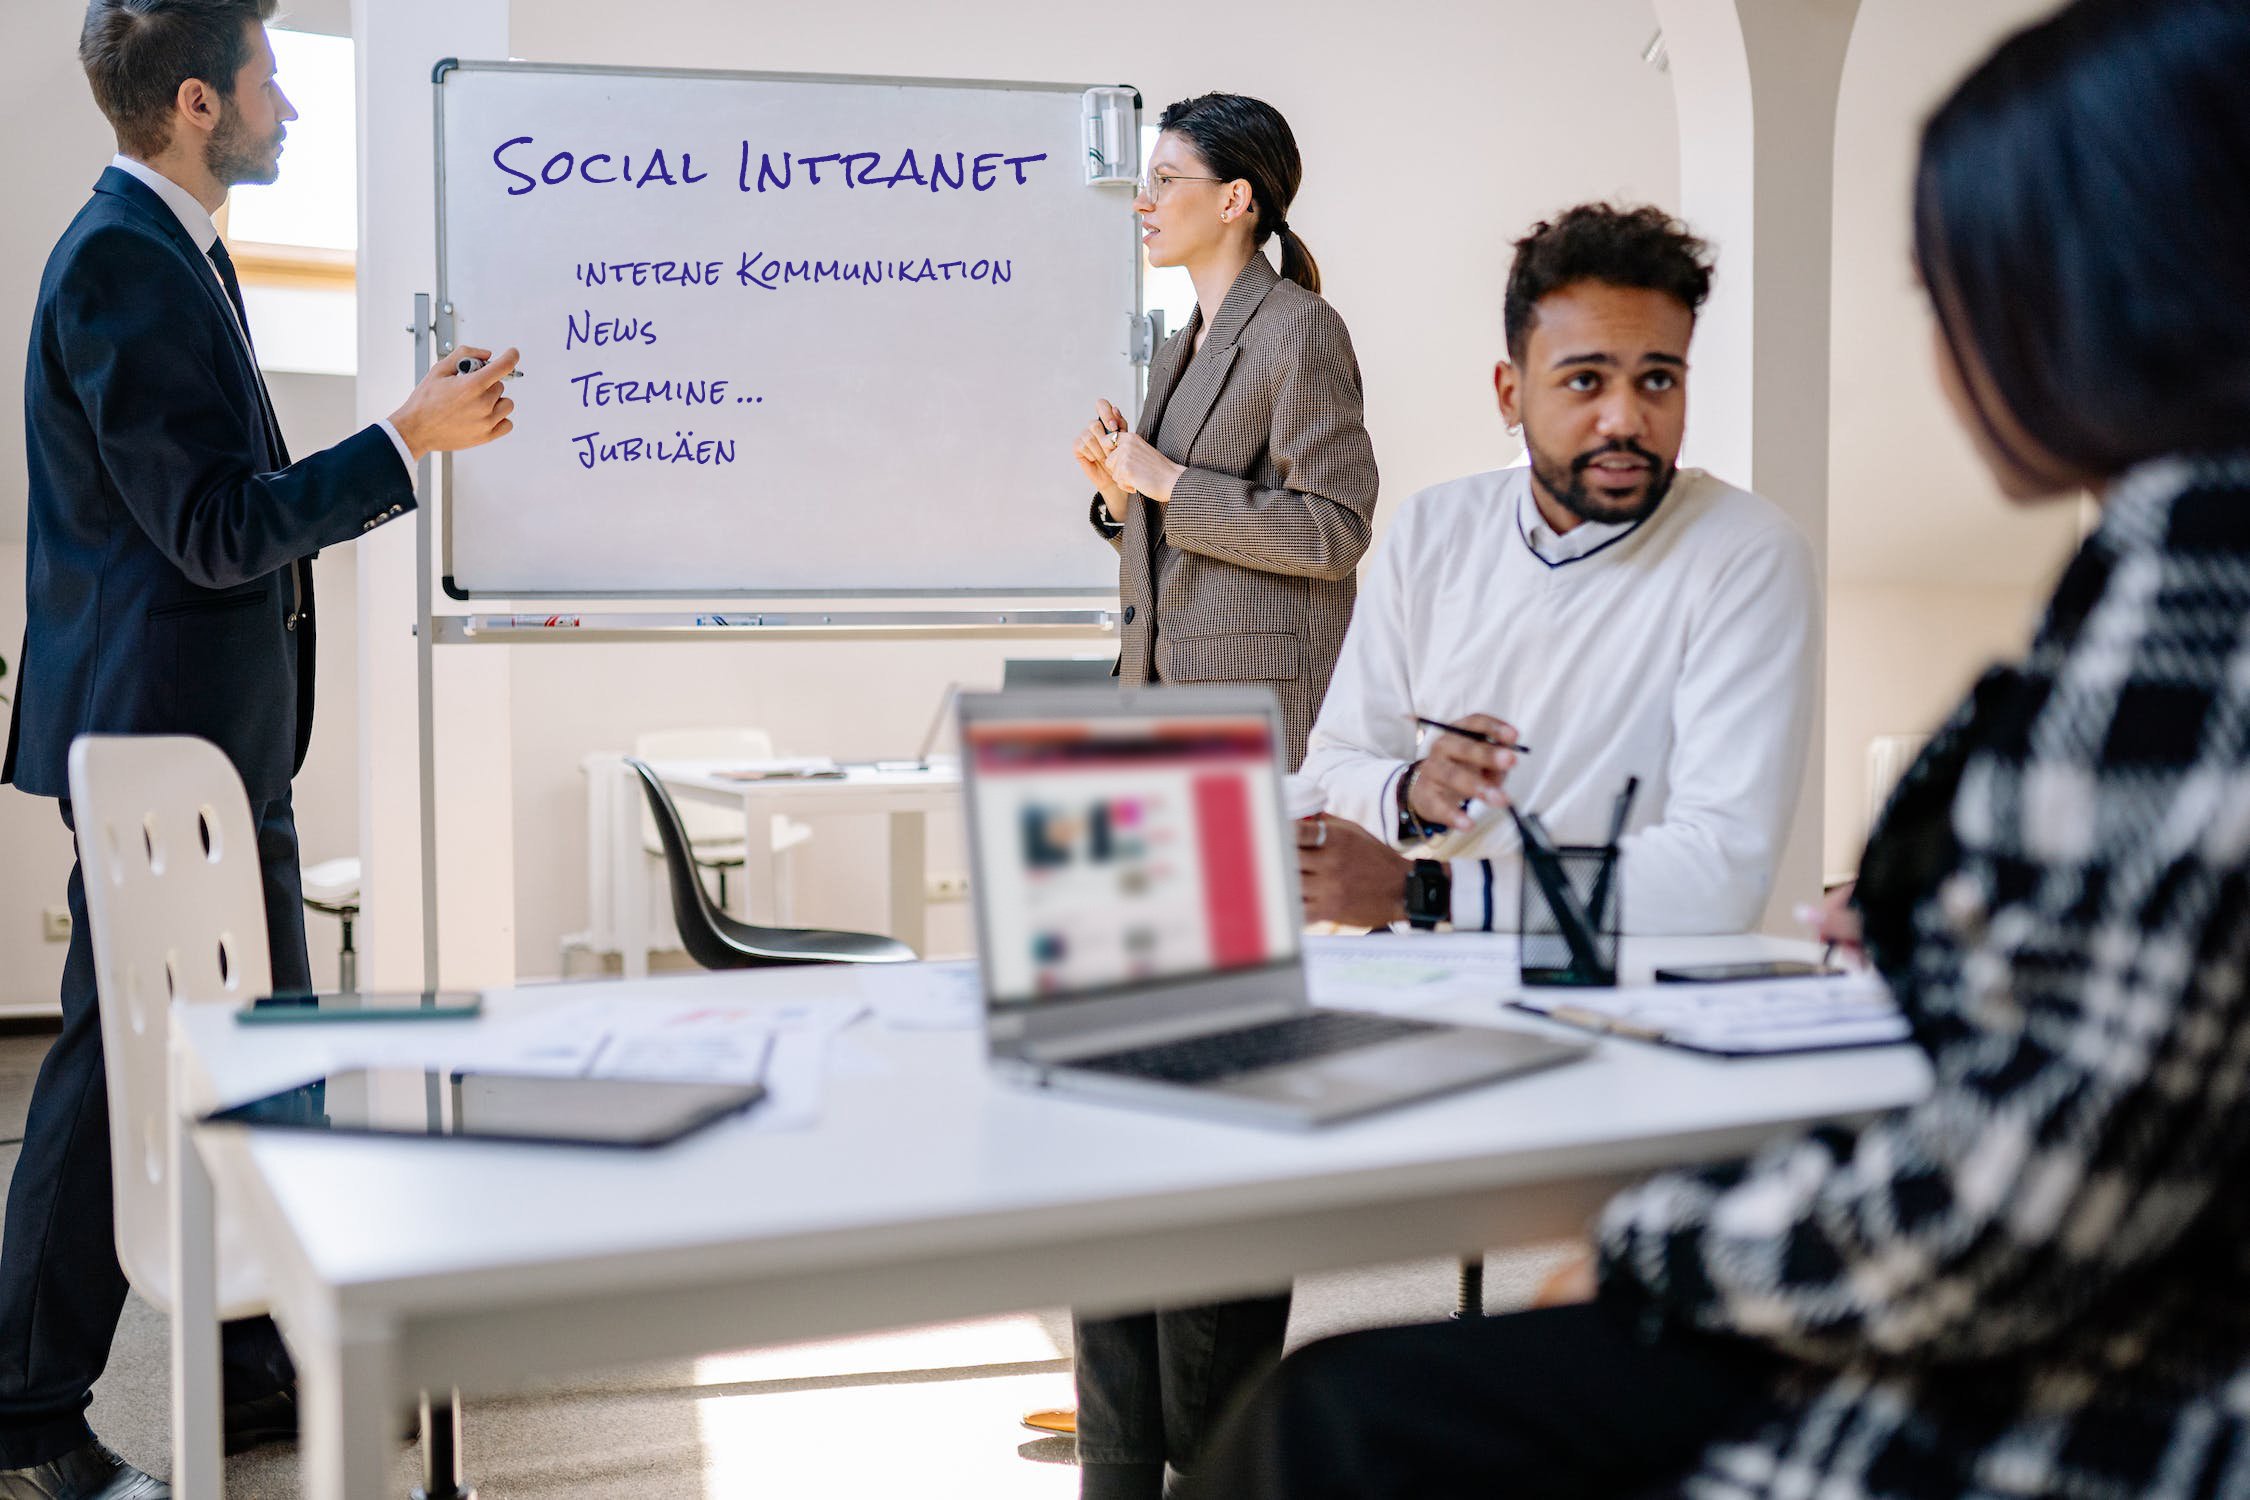 Social Intranet mit SharePoint Webcast